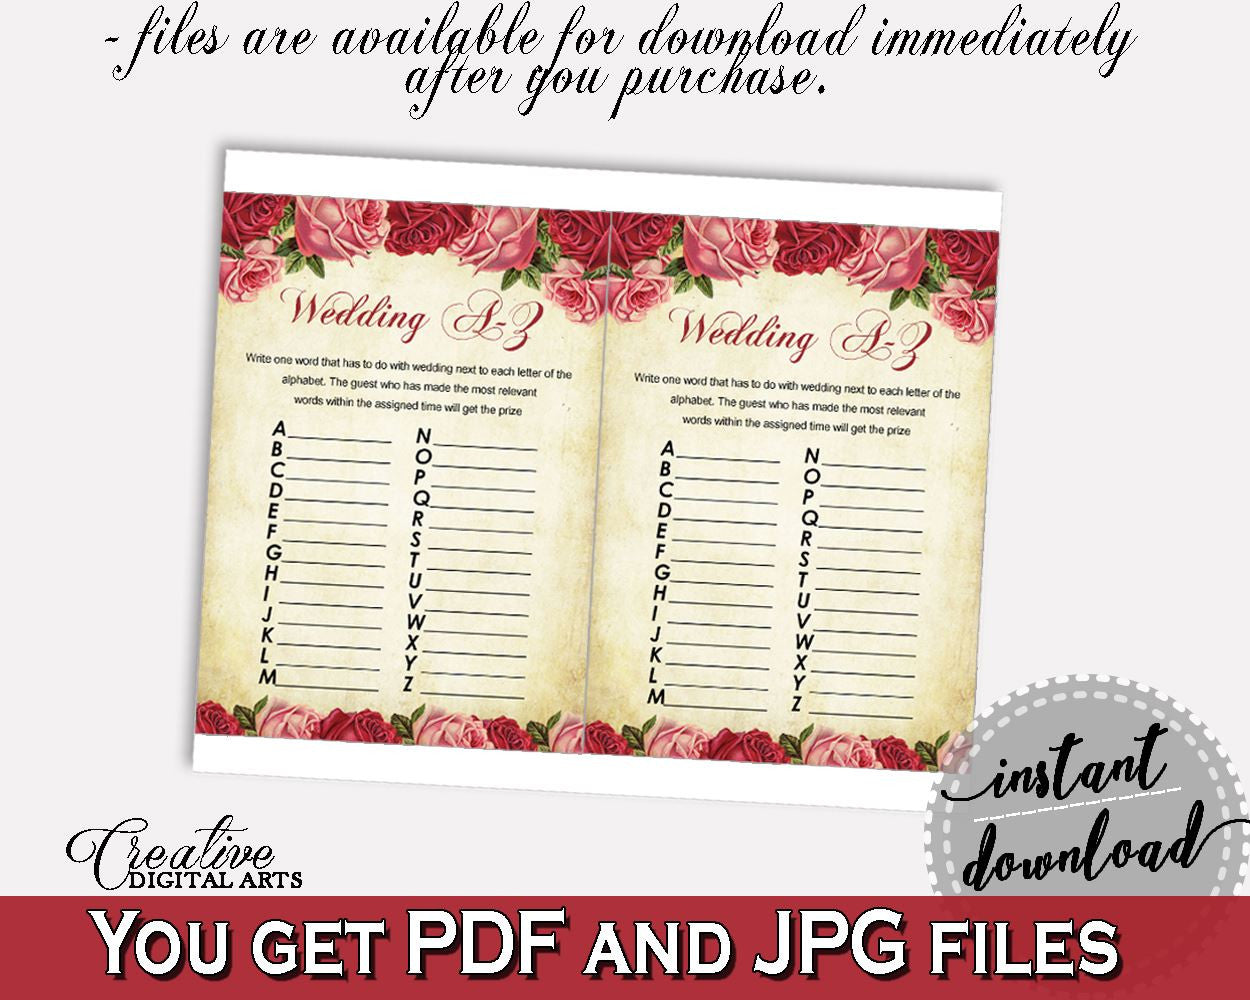 Wedding Game Bridal Shower Wedding Game Vintage Bridal Shower Wedding Game Bridal Shower Vintage Wedding Game Red Pink party décor XBJK2 - Digital Product